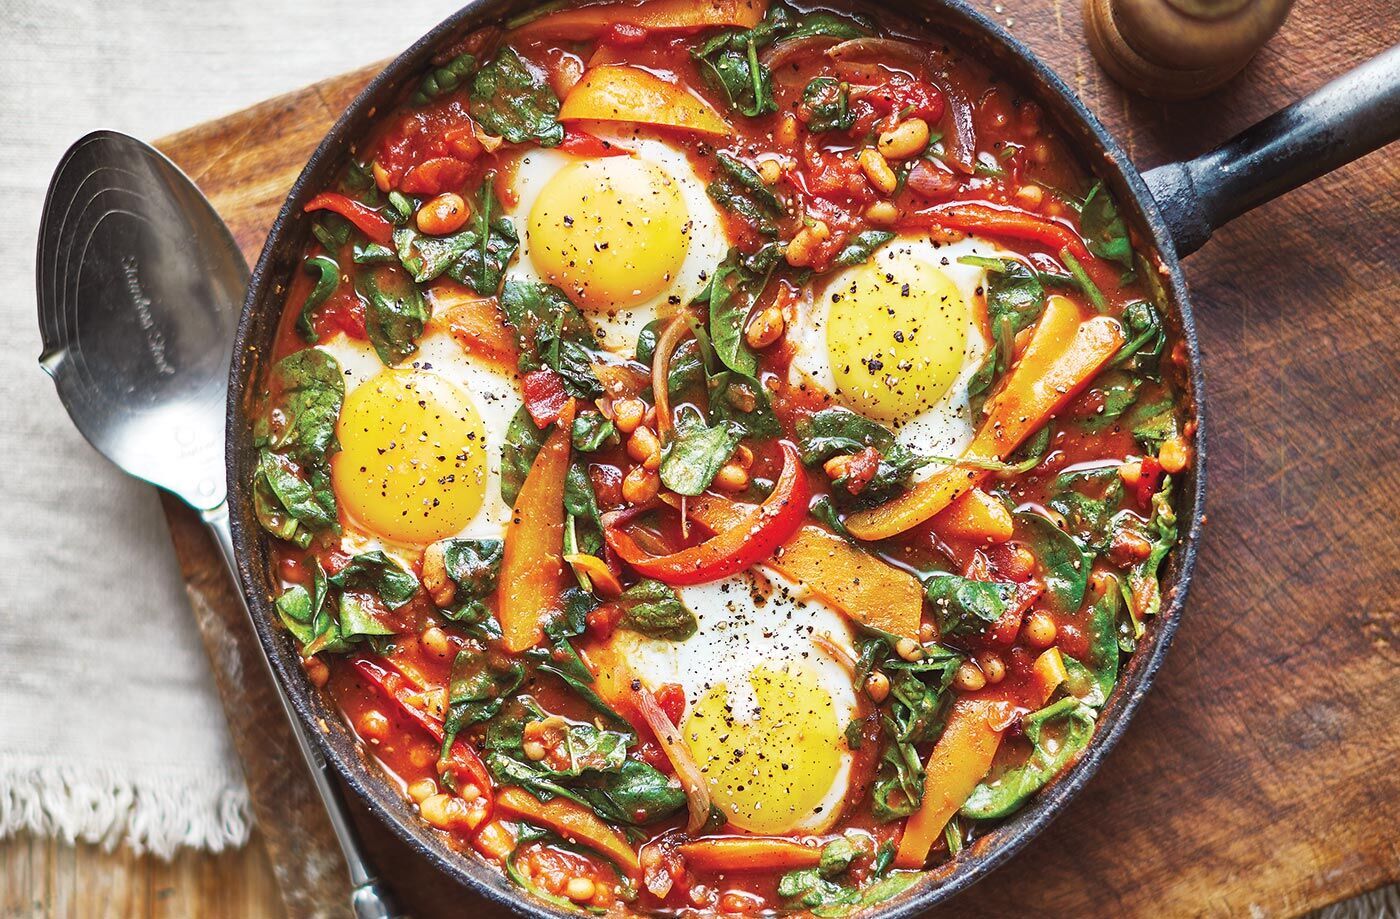 Baked eggs in the oven